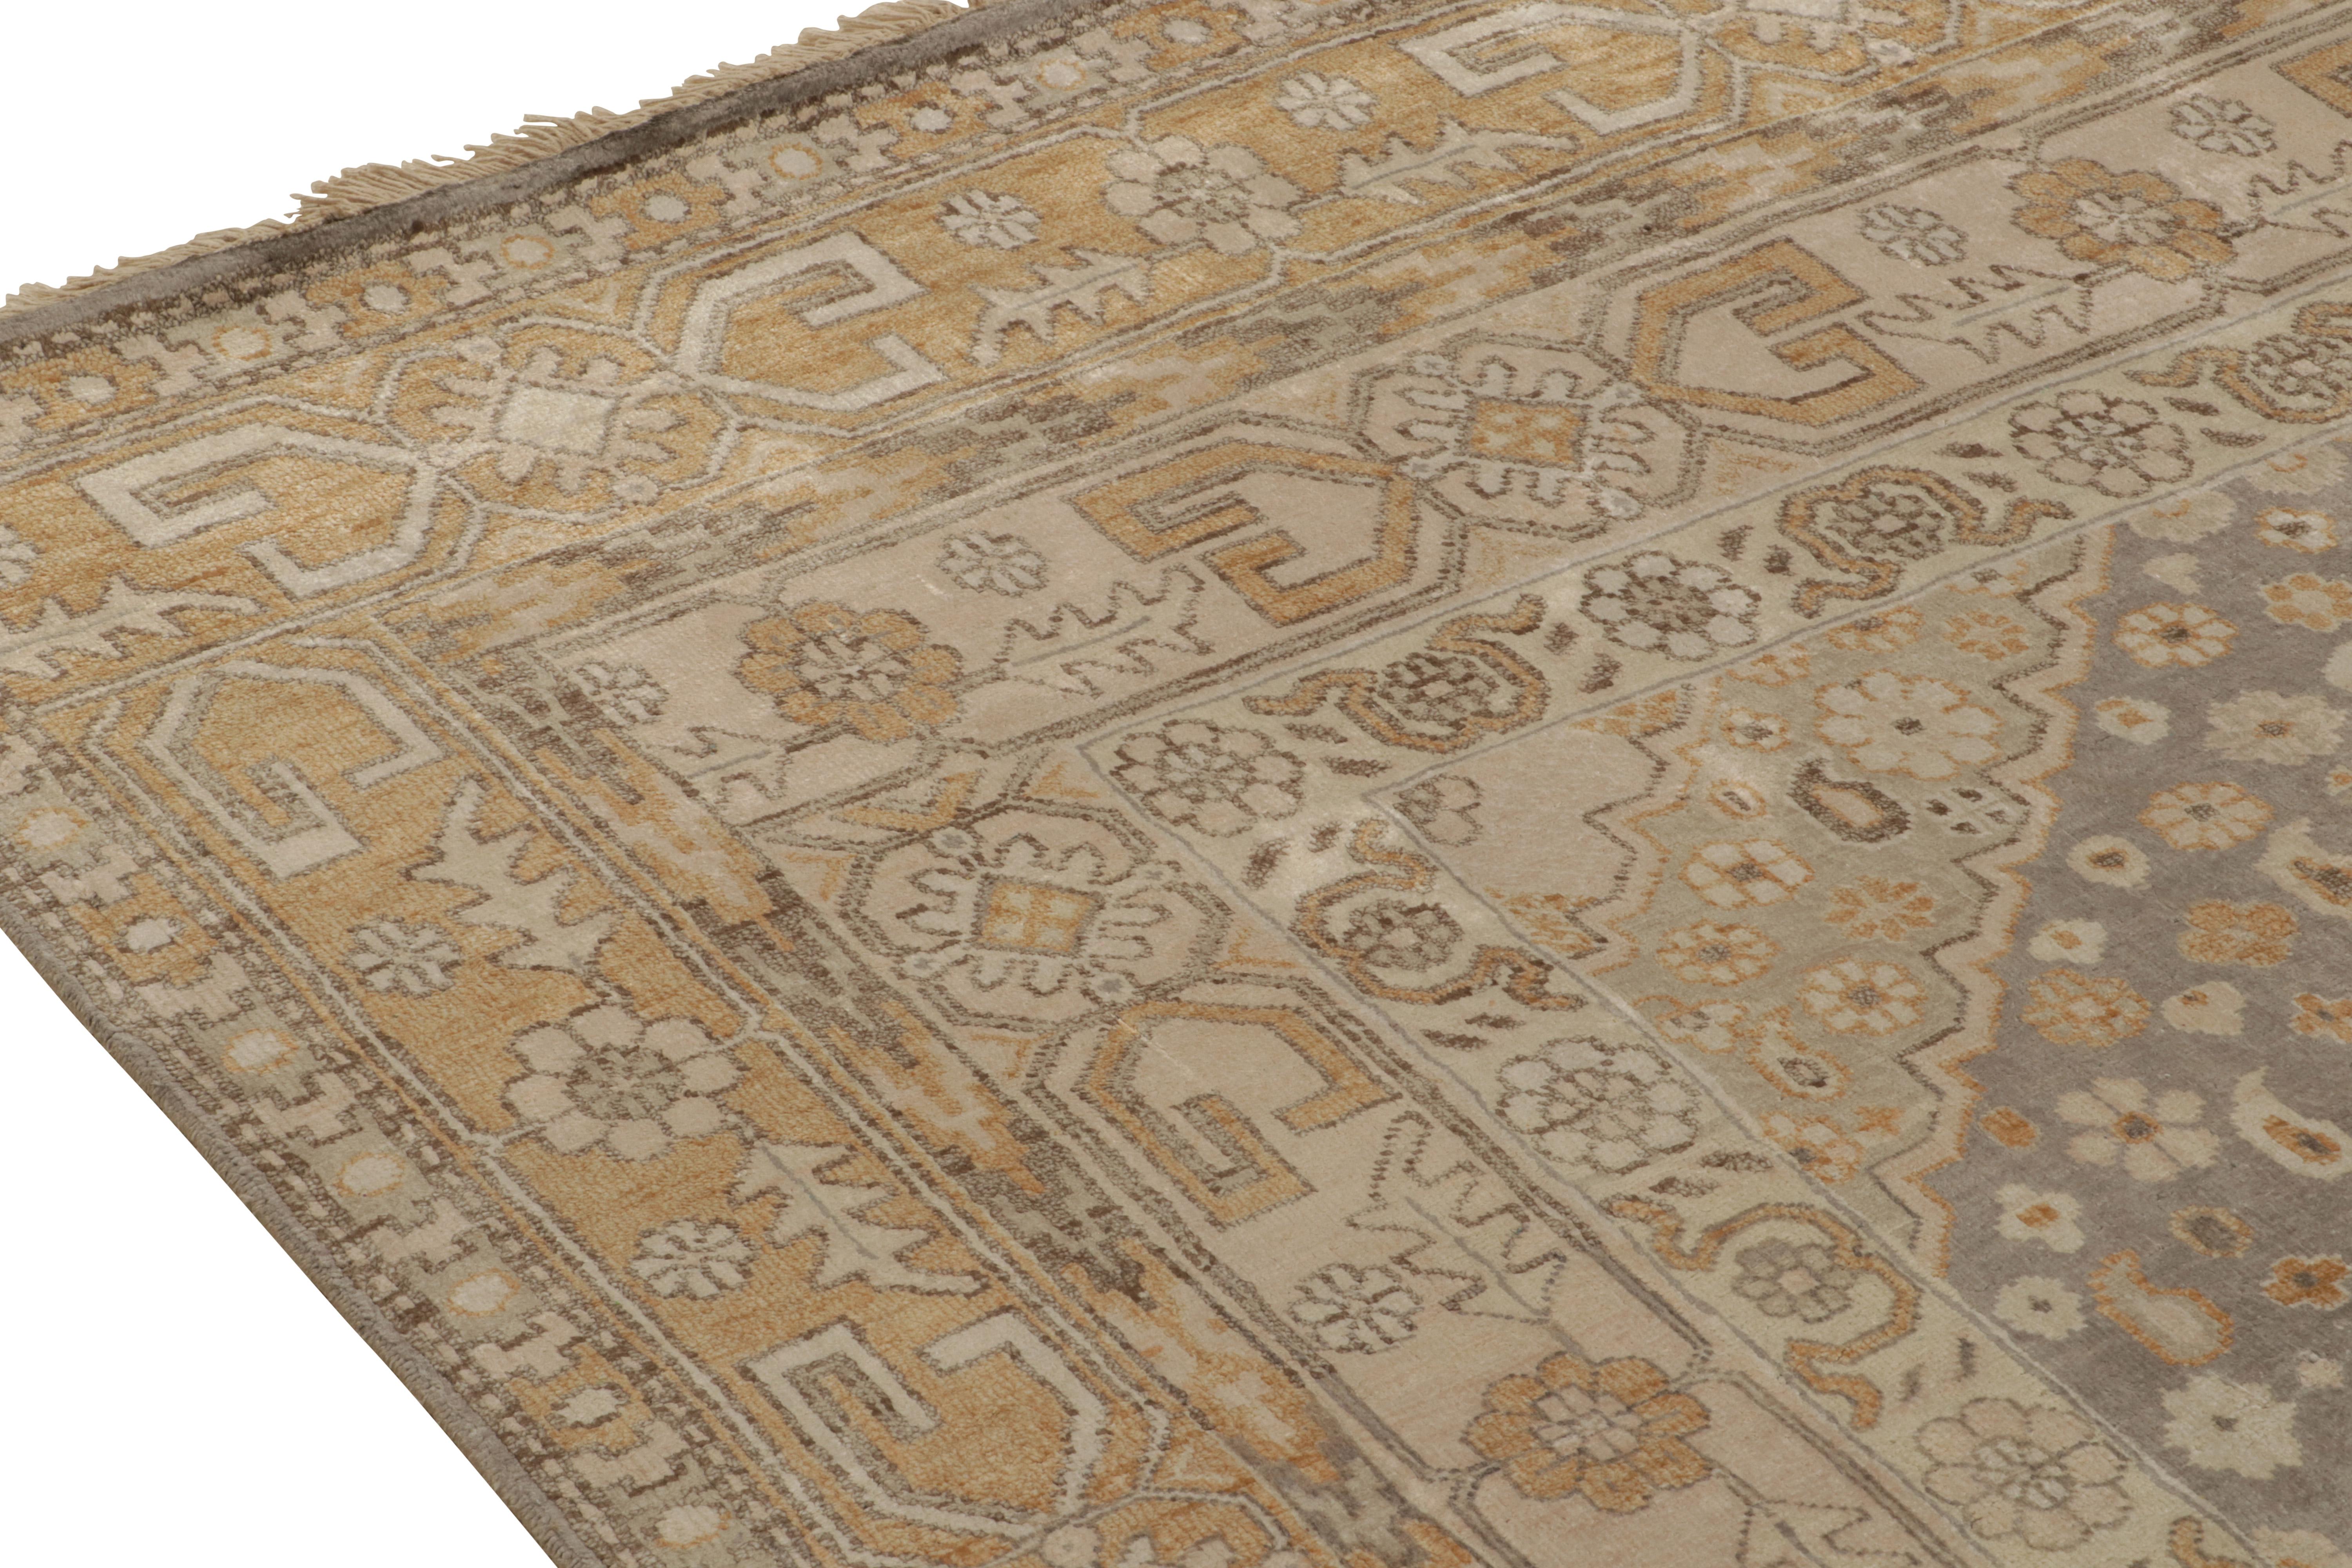 Rug & Kilim’s Classic Khotan style rug in Beige & Gold Diamonds, Floral Patterns In New Condition For Sale In Long Island City, NY